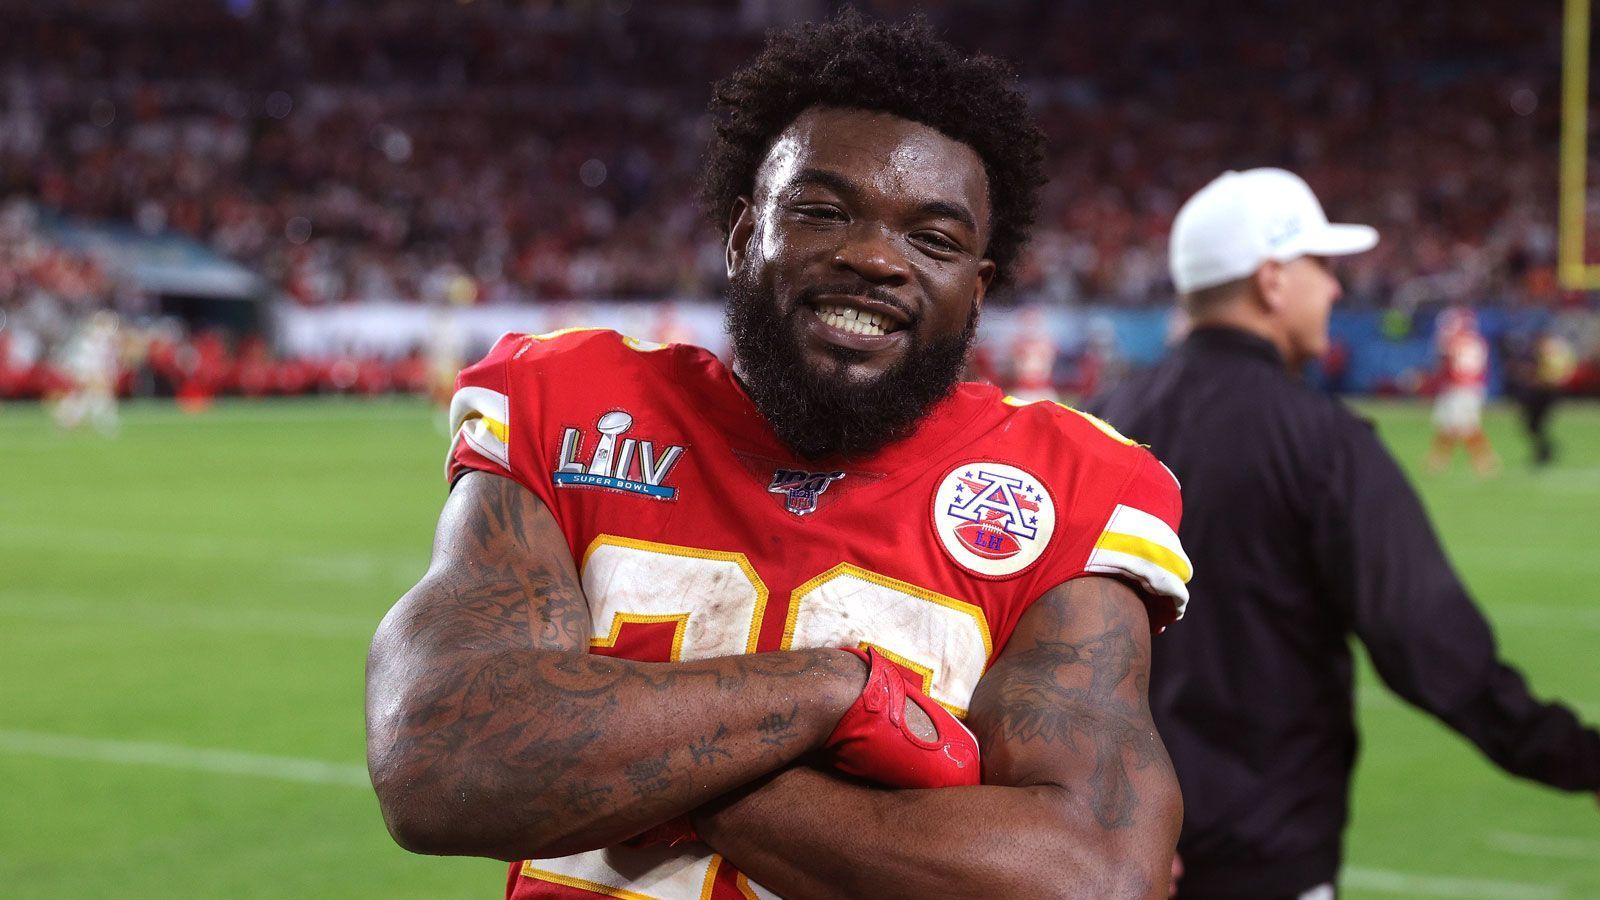 
                <strong>Kansas City Chiefs</strong><br>
                Damien Williams (Running Back, Foto), Laurent Duvernay-Tardif (Guard), Lucas Niang (Offensive Tackle)
              